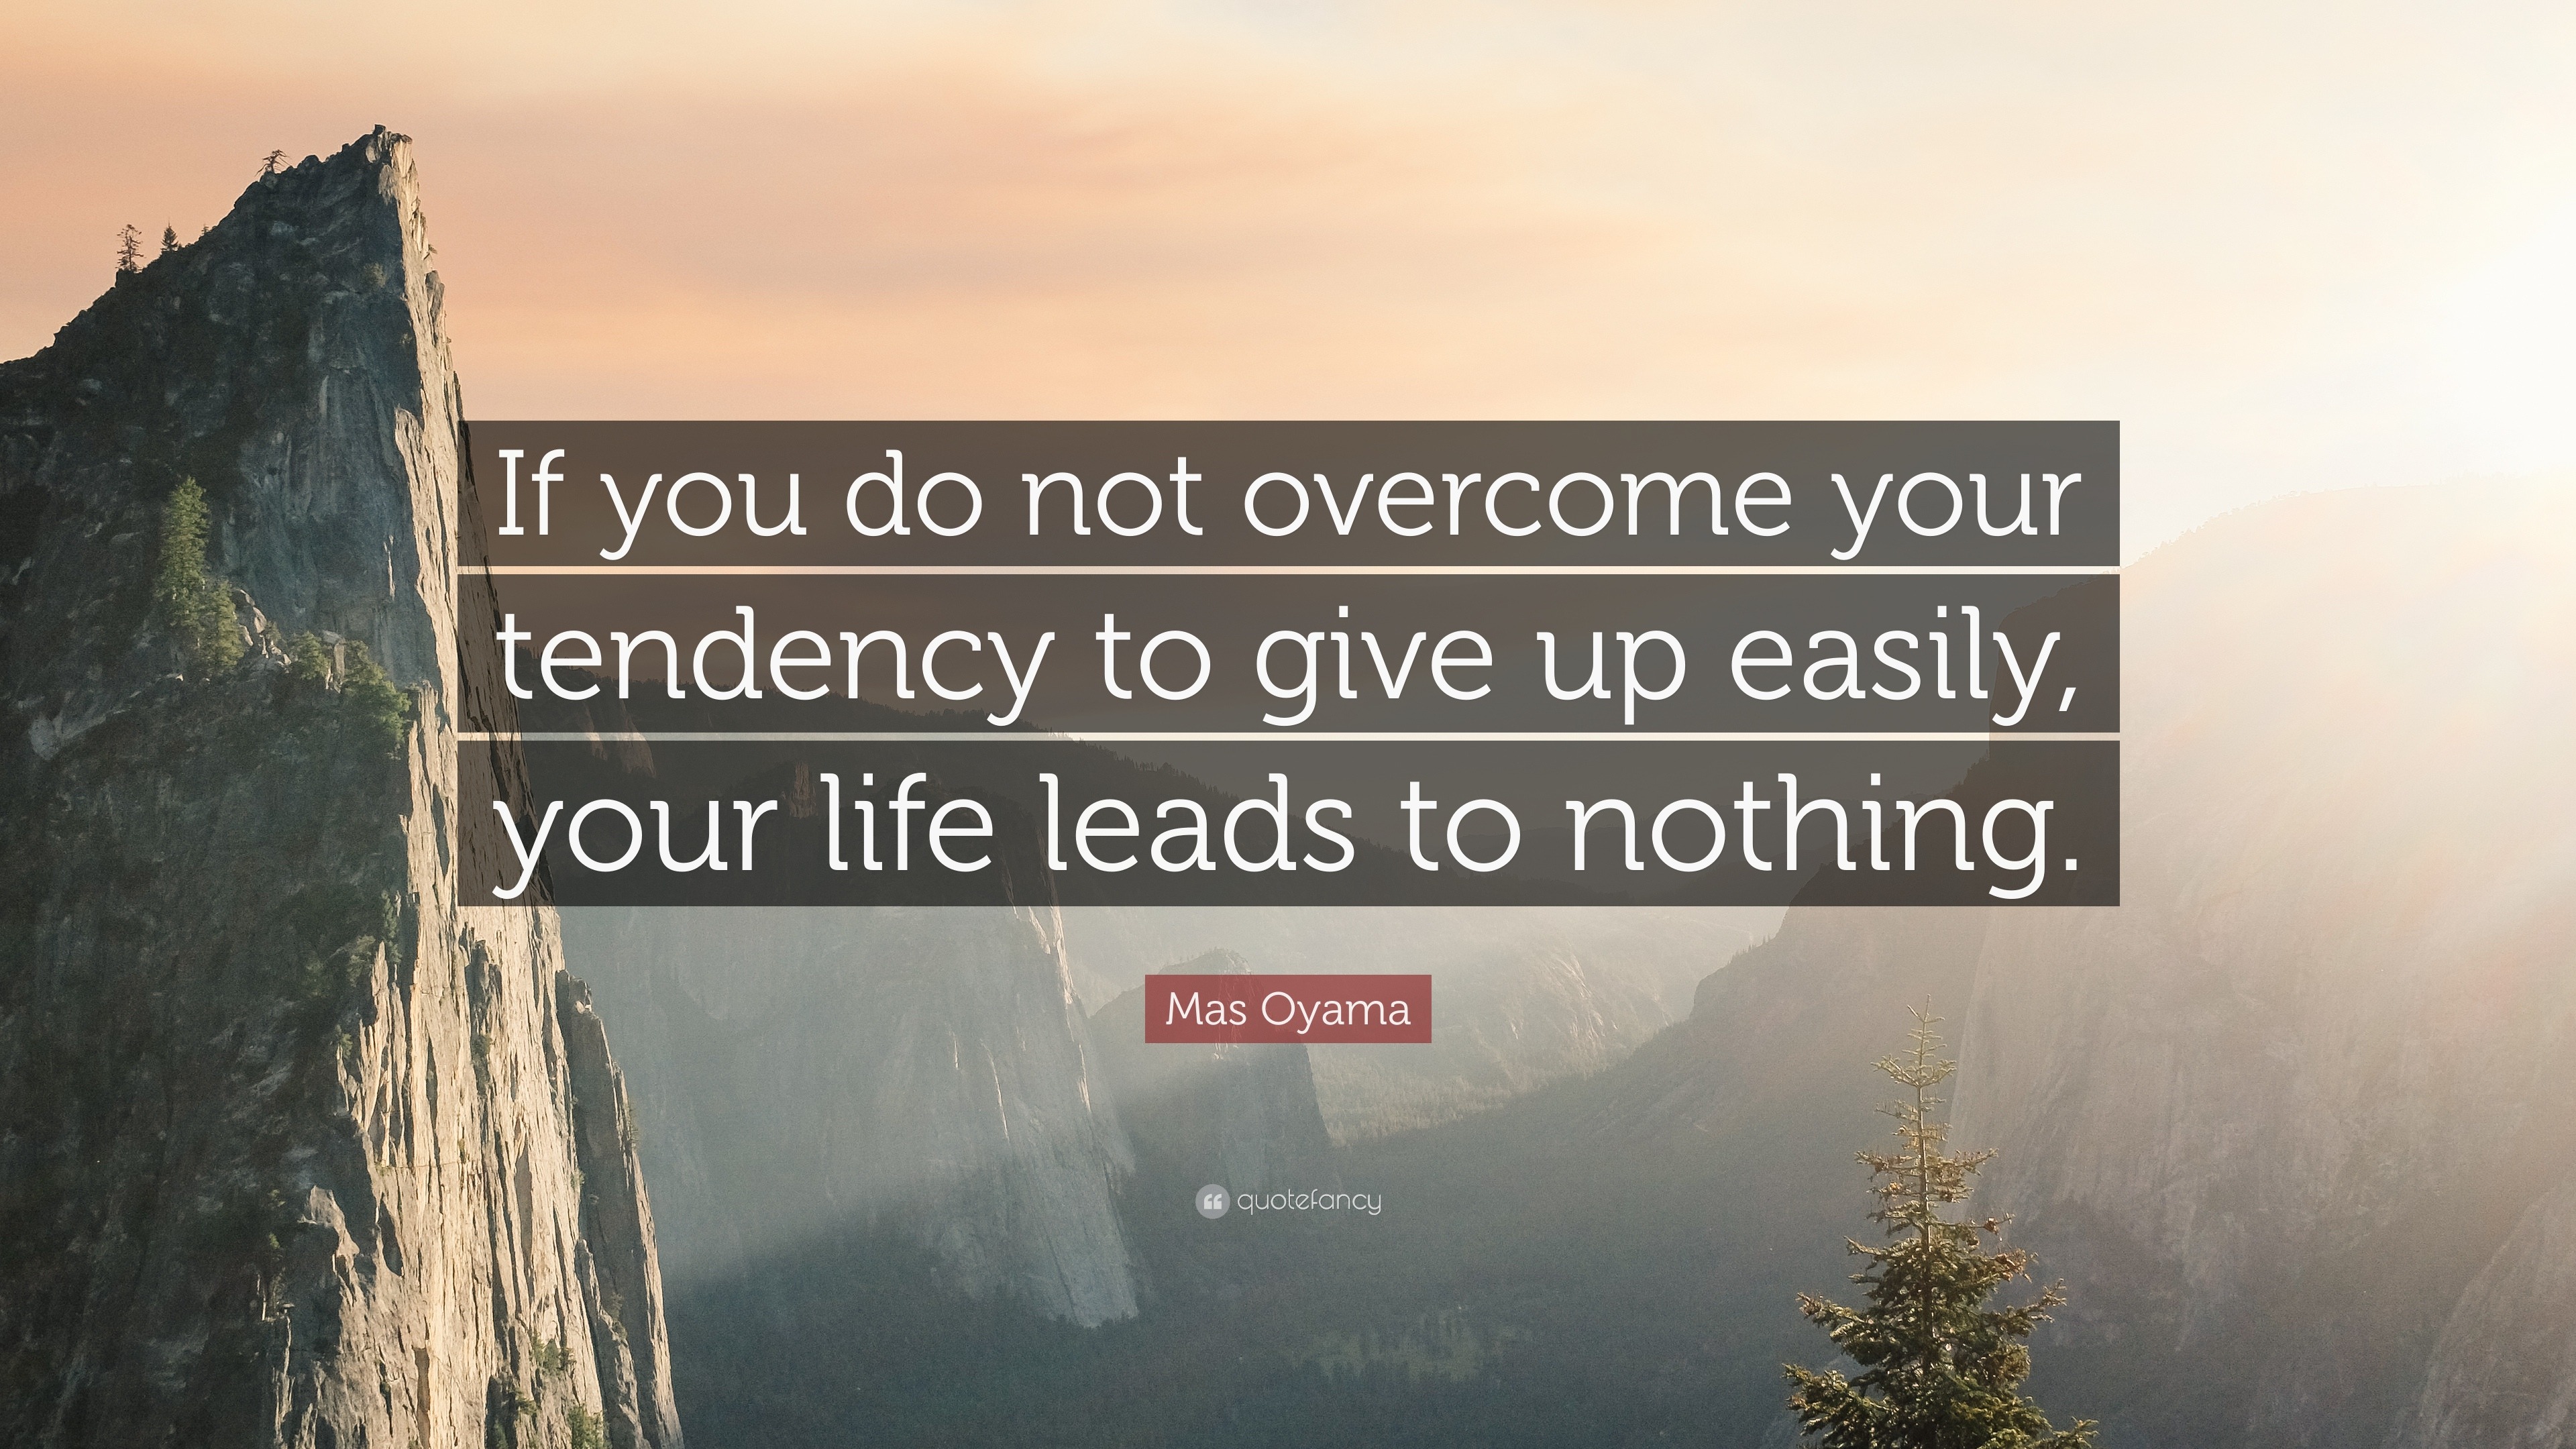 Mas Oyama Quote: “If you do not overcome your tendency to give up ...